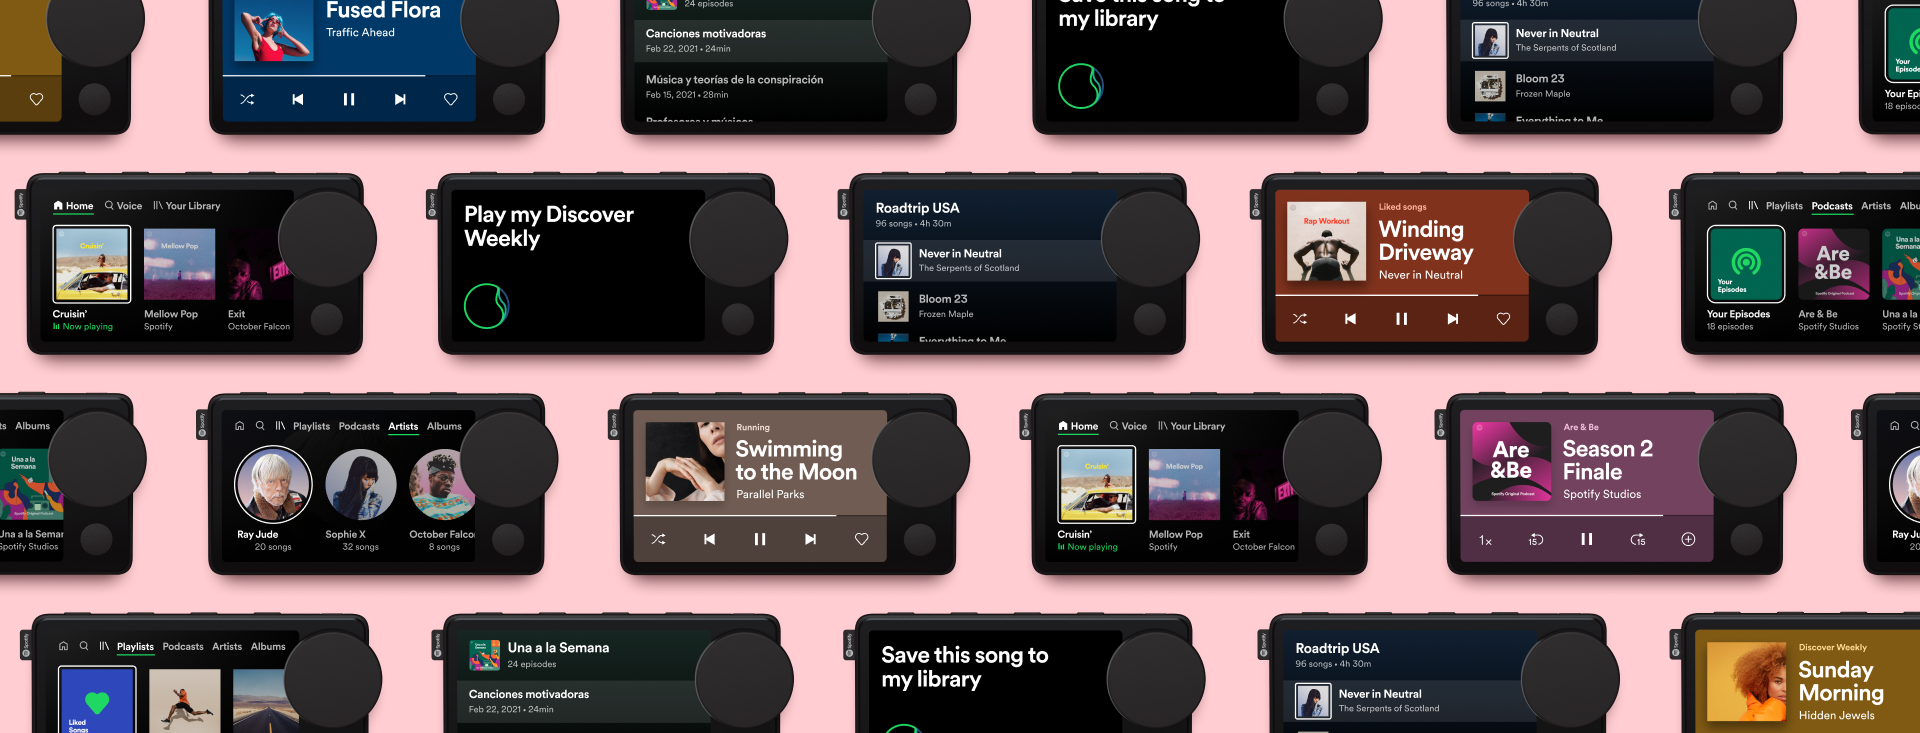 Spotify Debuts New “Car Thing” System For A Limited Time